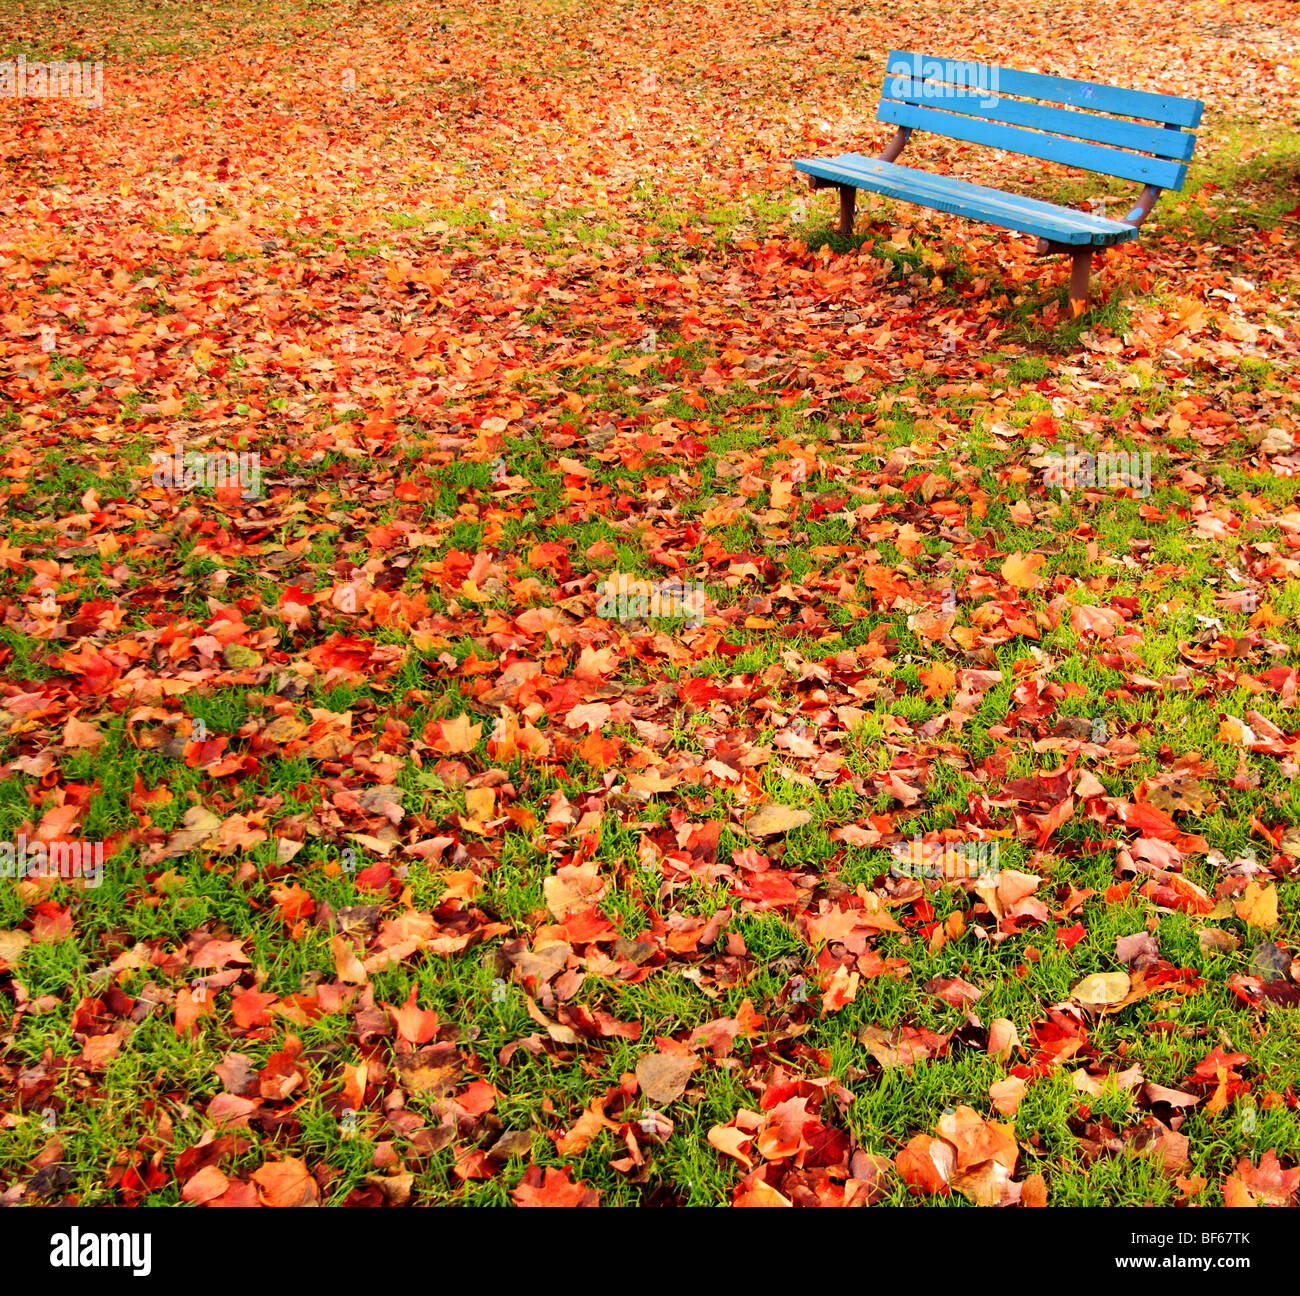 A lone, blue bench in a park surrounded by autumn leaves. Stock Photo